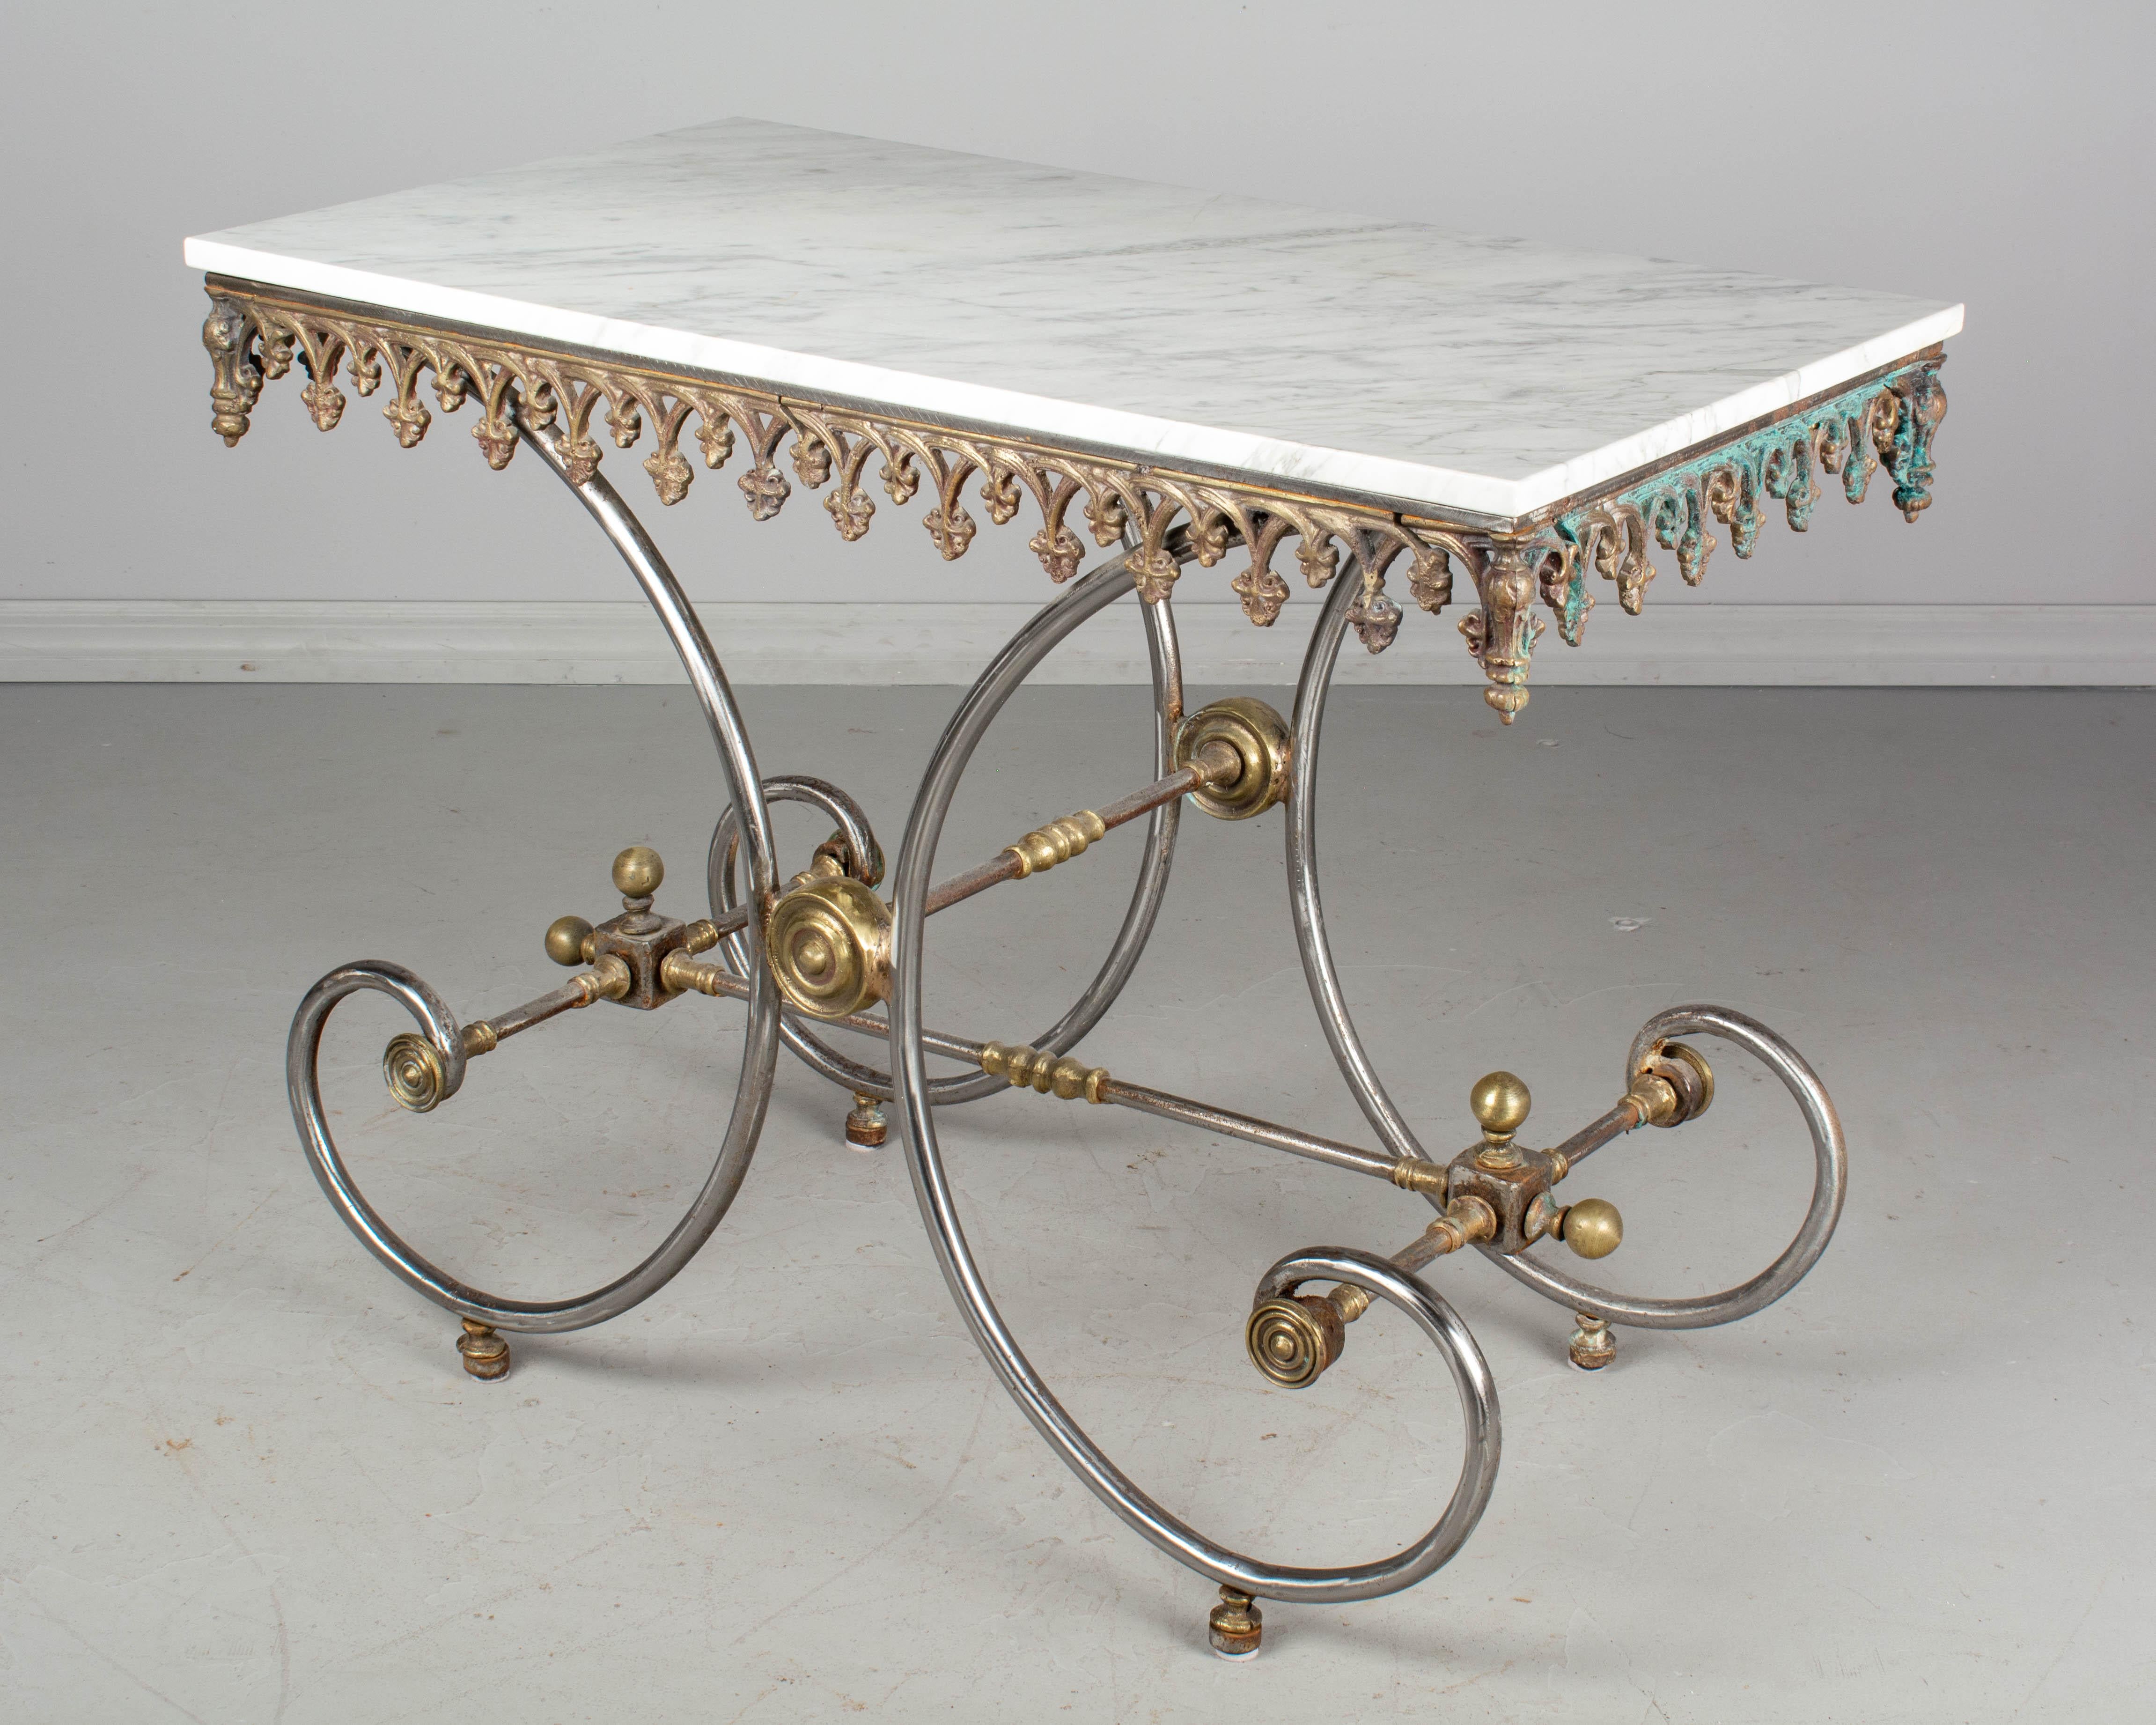 A French pastry table polished curved wrought iron base and brass hardware. Decorative cast iron frieze around the perimeter. White veined marble top. Condition of metal is as found, with rust and blue green patina on one side. A good replica of a